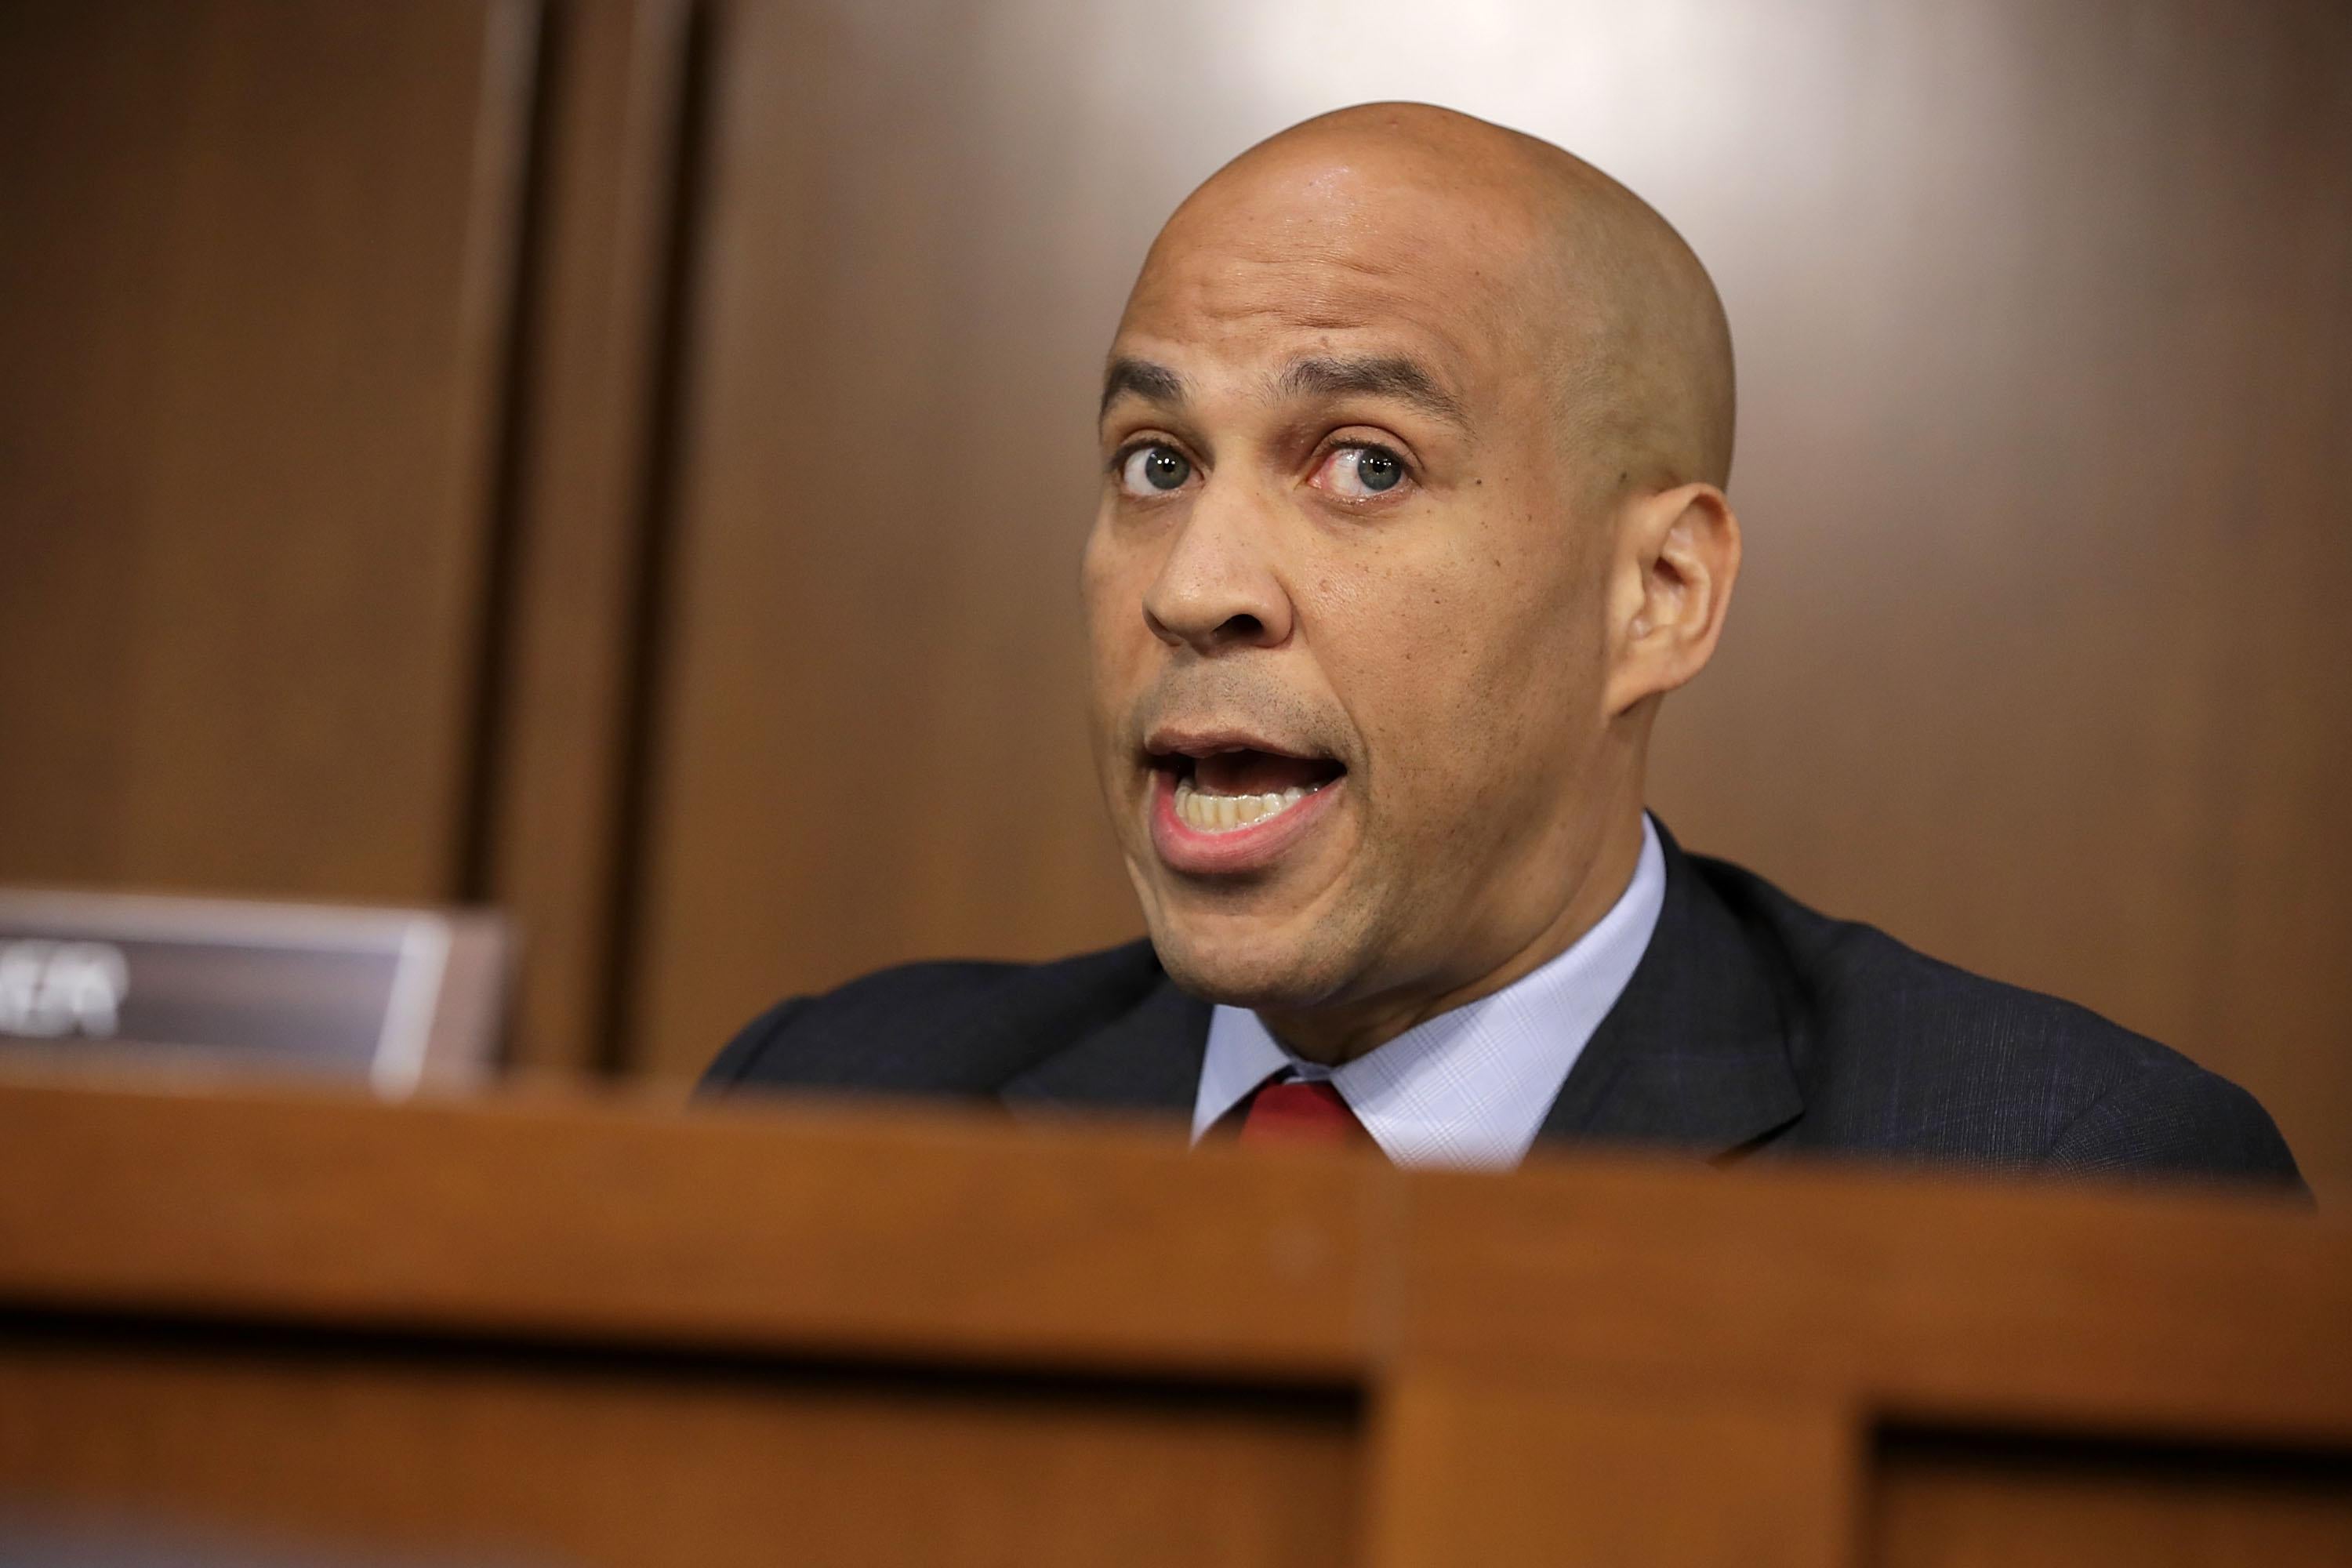 Senate Judiciary Committee member Cory Booker argues with Republican members of the committee during the third day of Supreme Court nominee Judge Brett Kavanaugh's confirmation hearing.